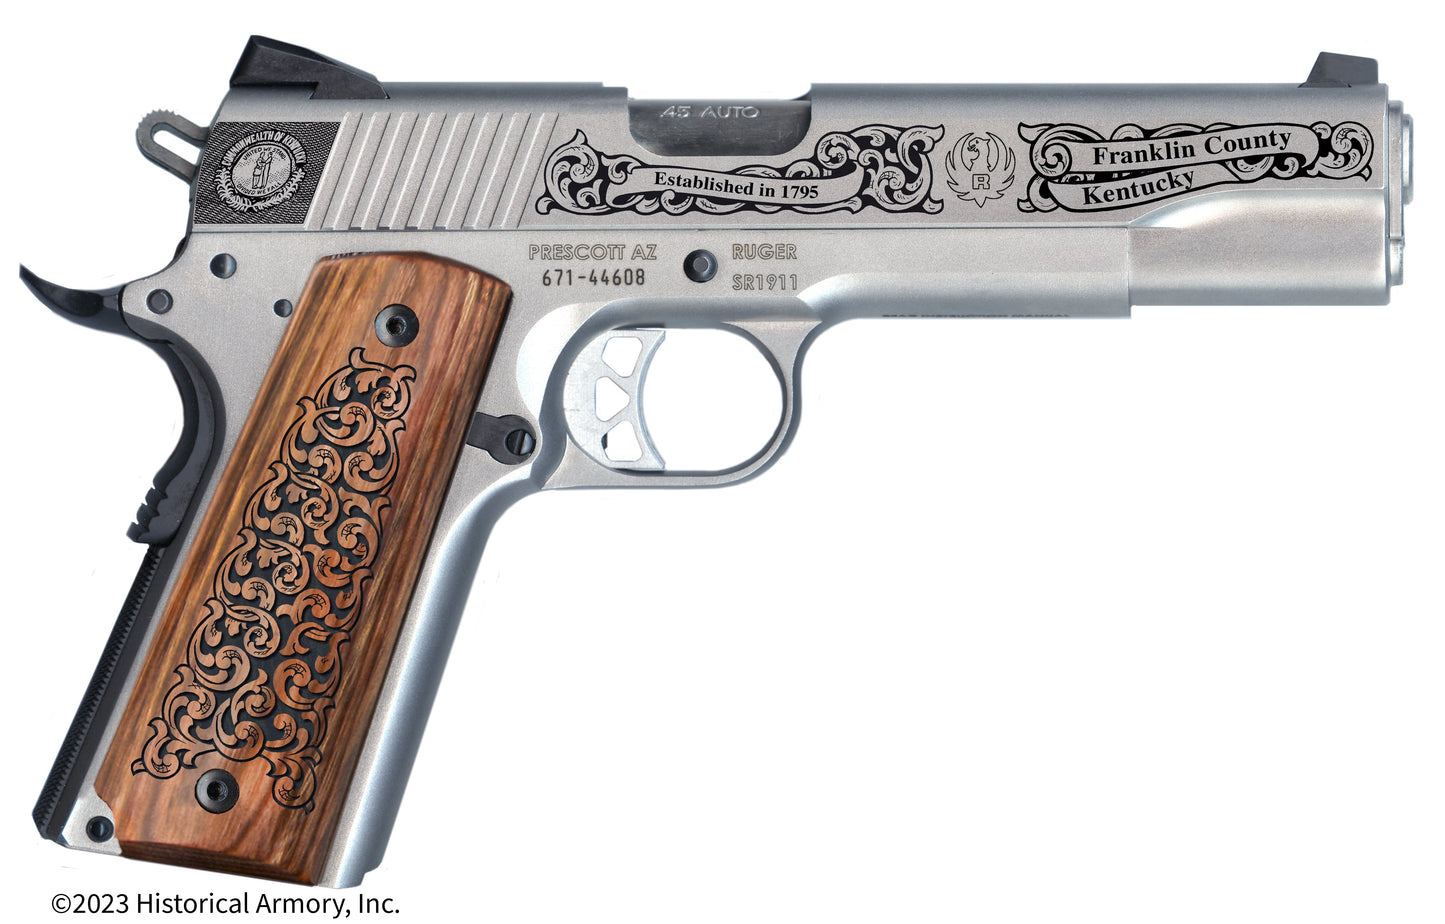 Franklin County Kentucky Engraved .45 Auto Ruger 1911